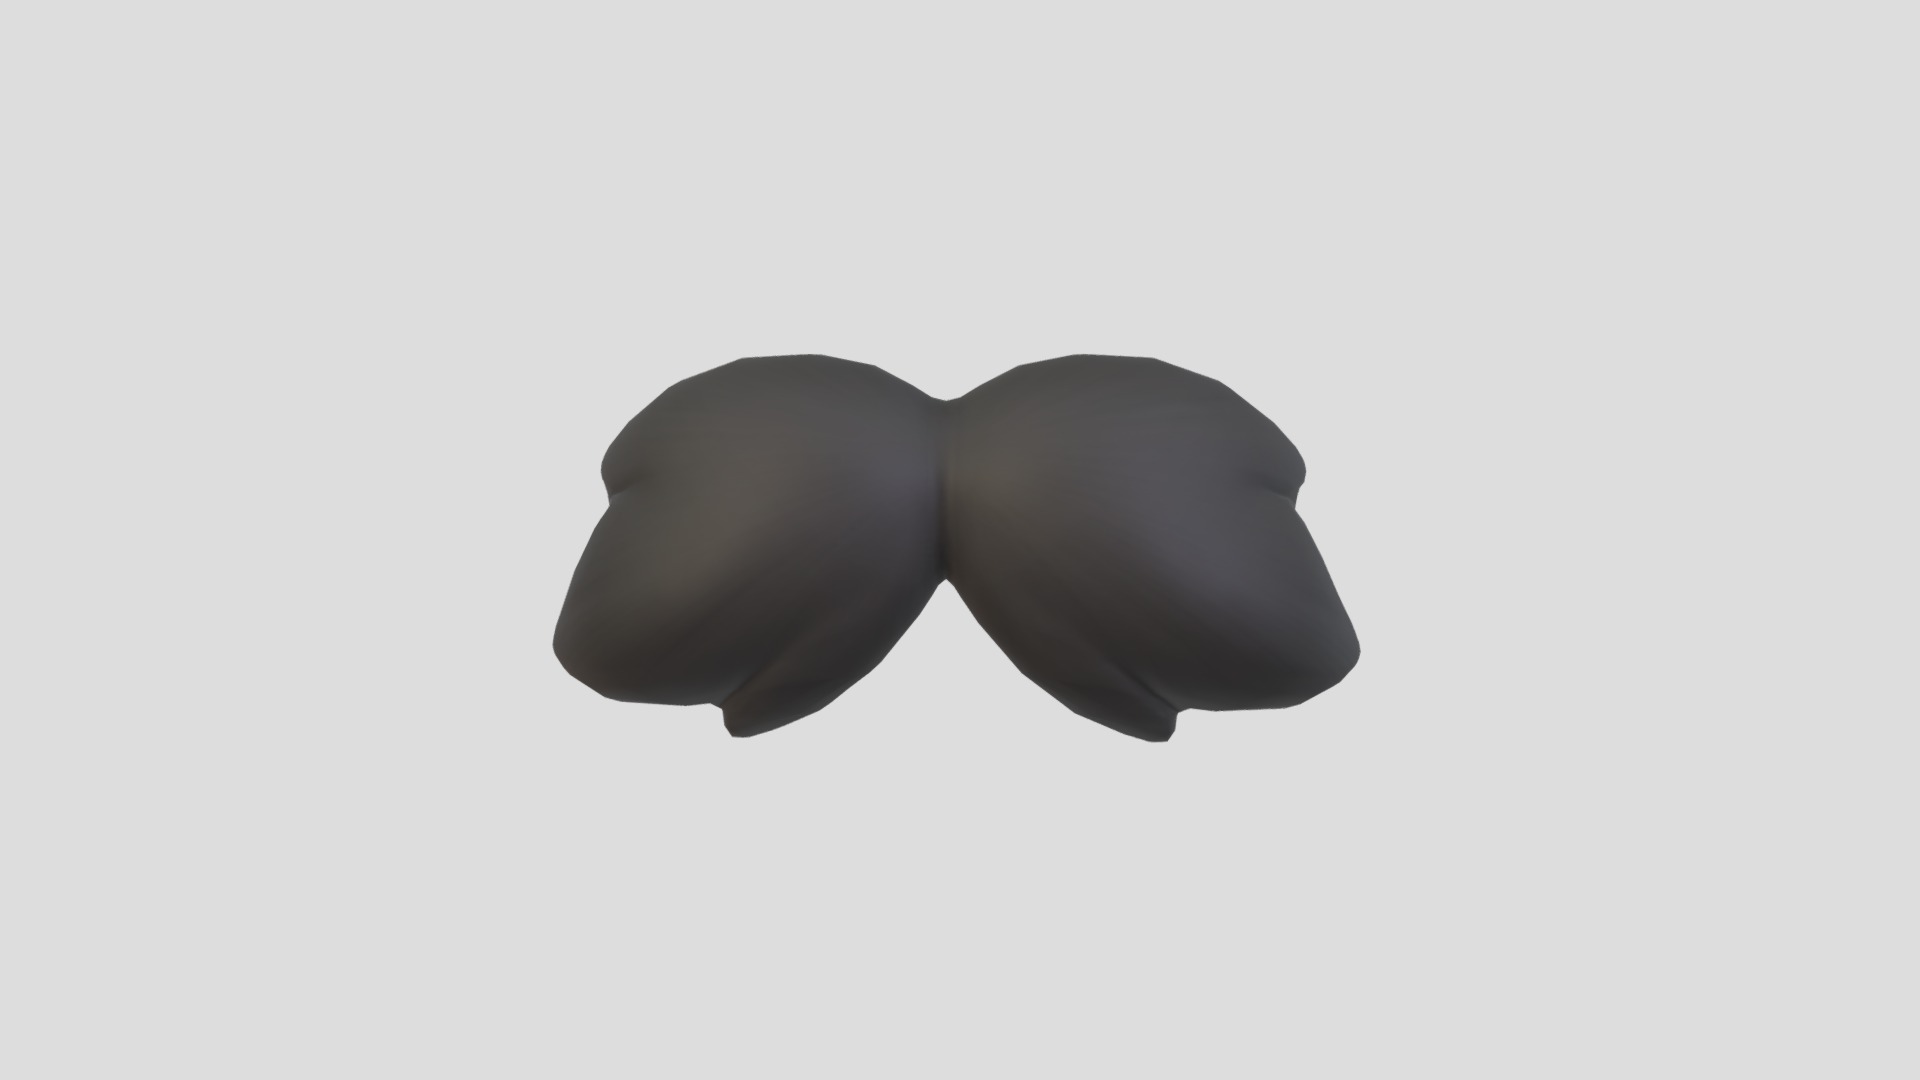 3D model Mustache 03 - This is a 3D model of the Mustache 03. The 3D model is about a black apple logo.